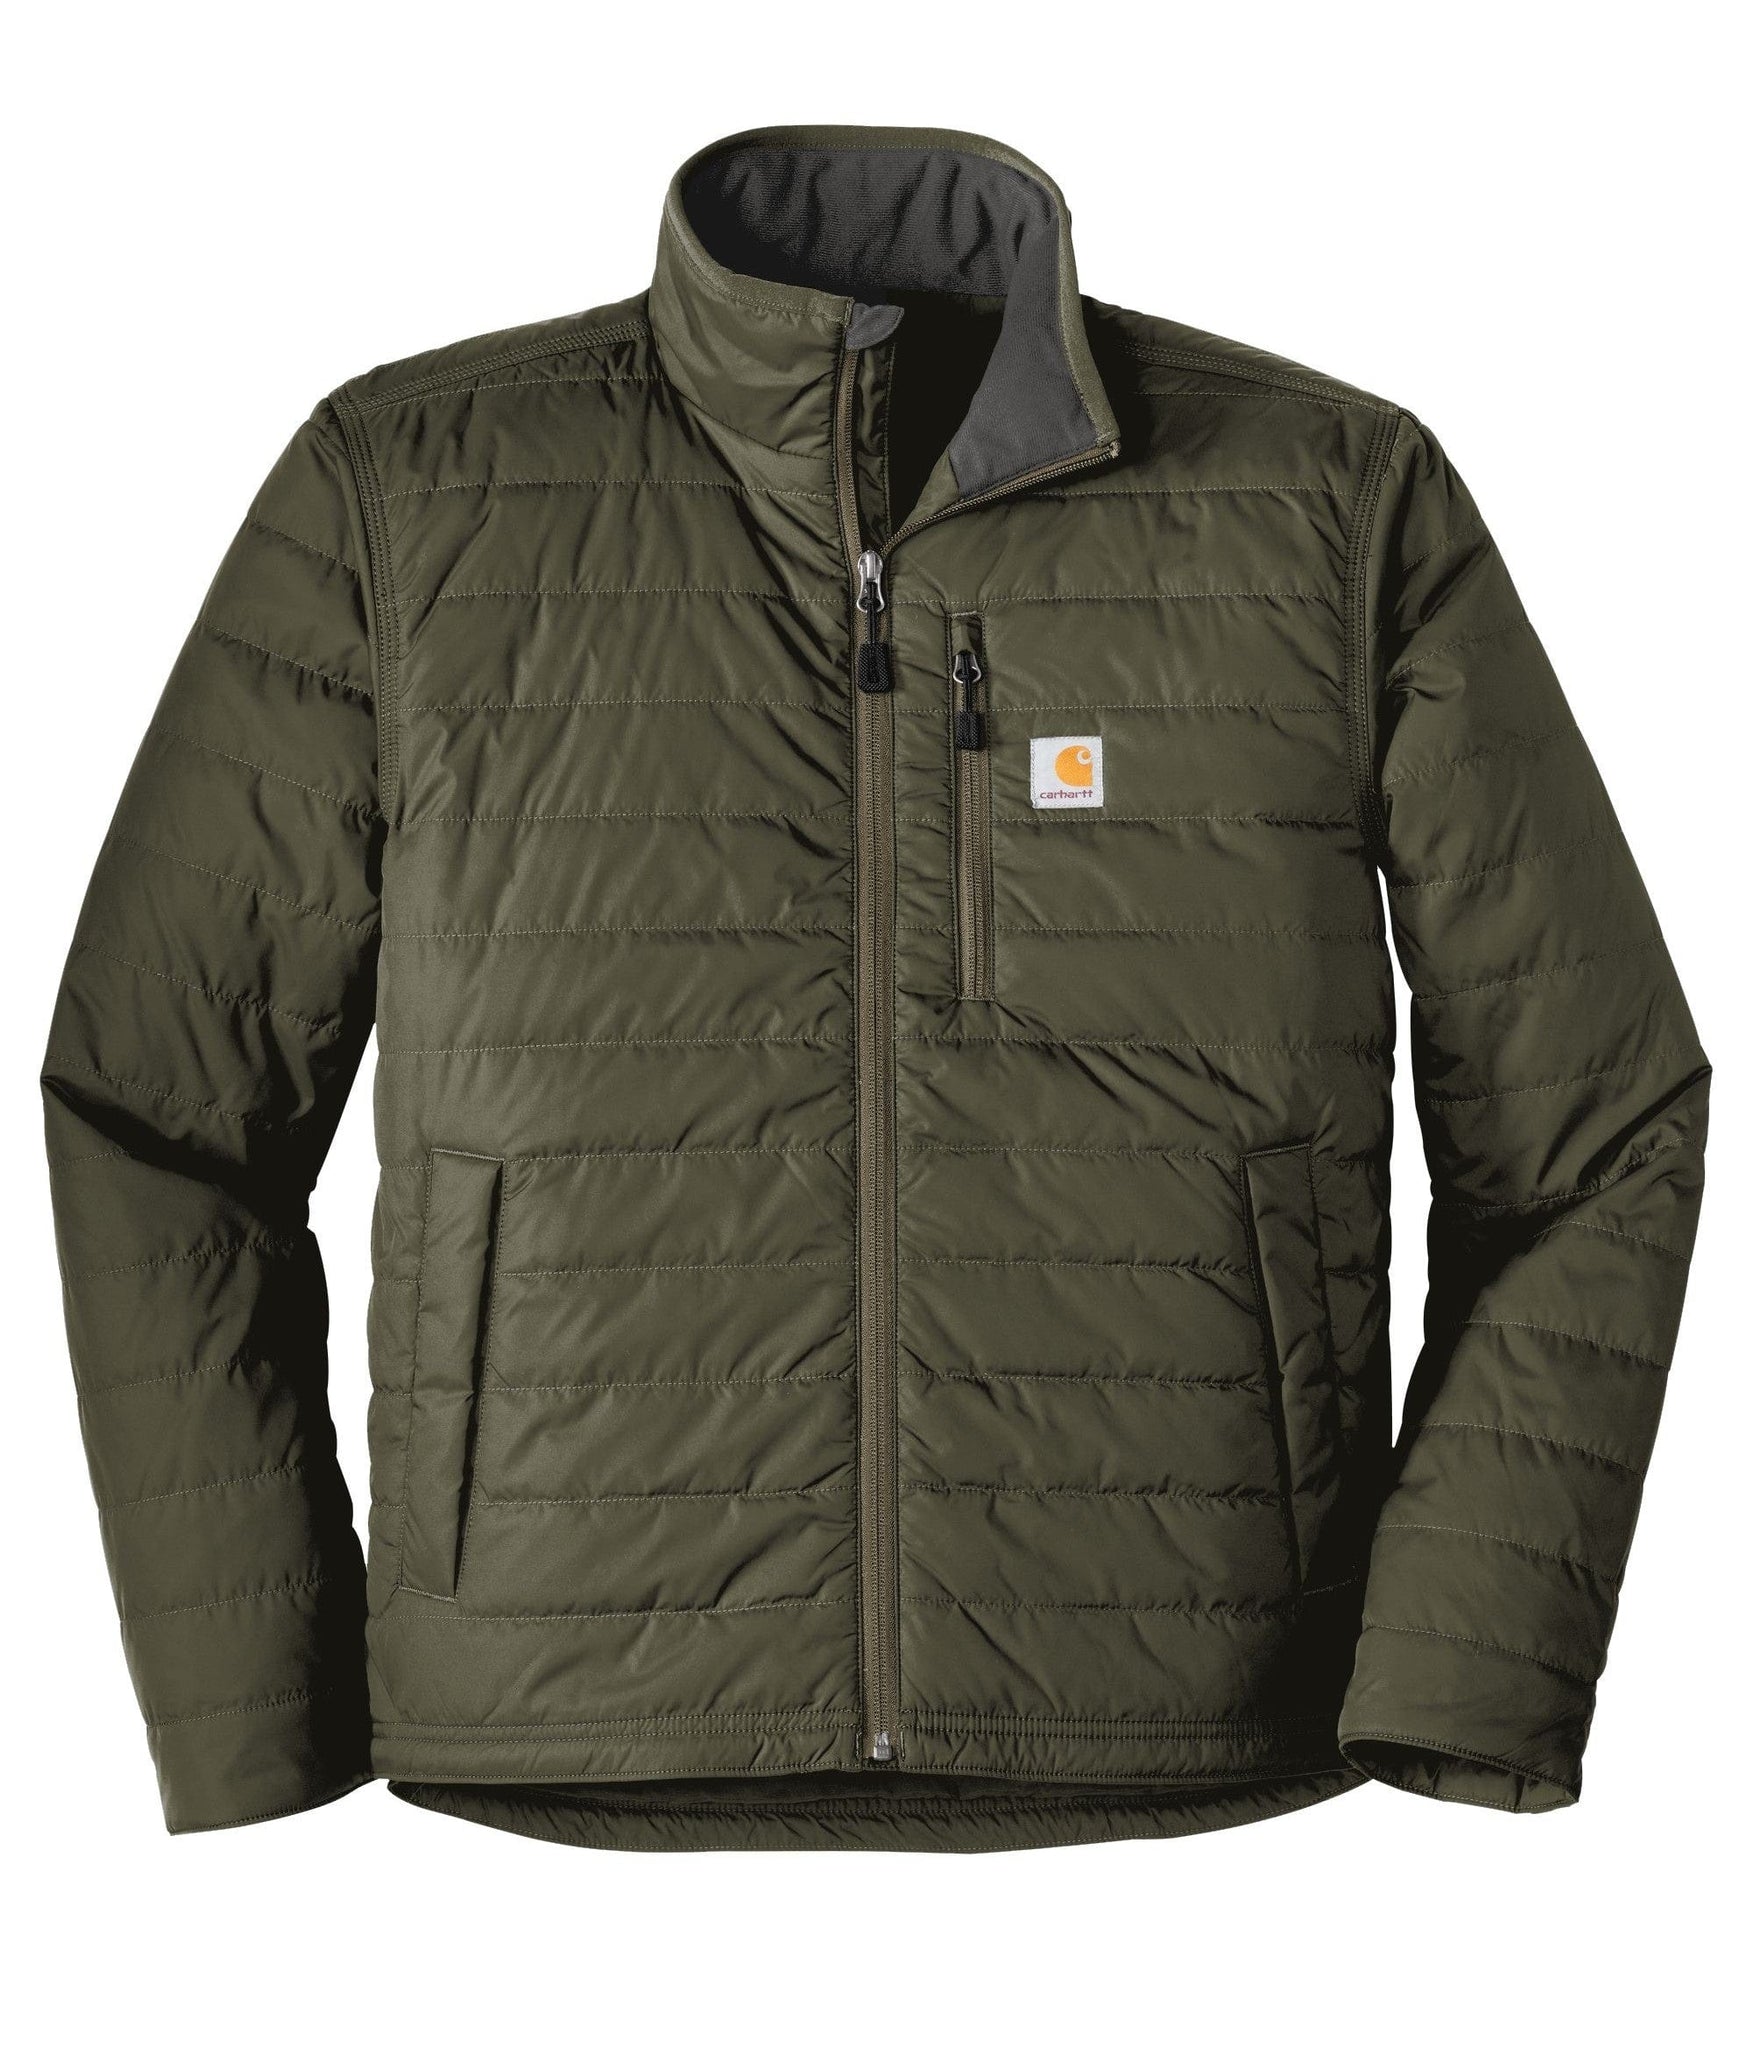 Carhartt Men's Gilliam Jacket *Limited sizes available while